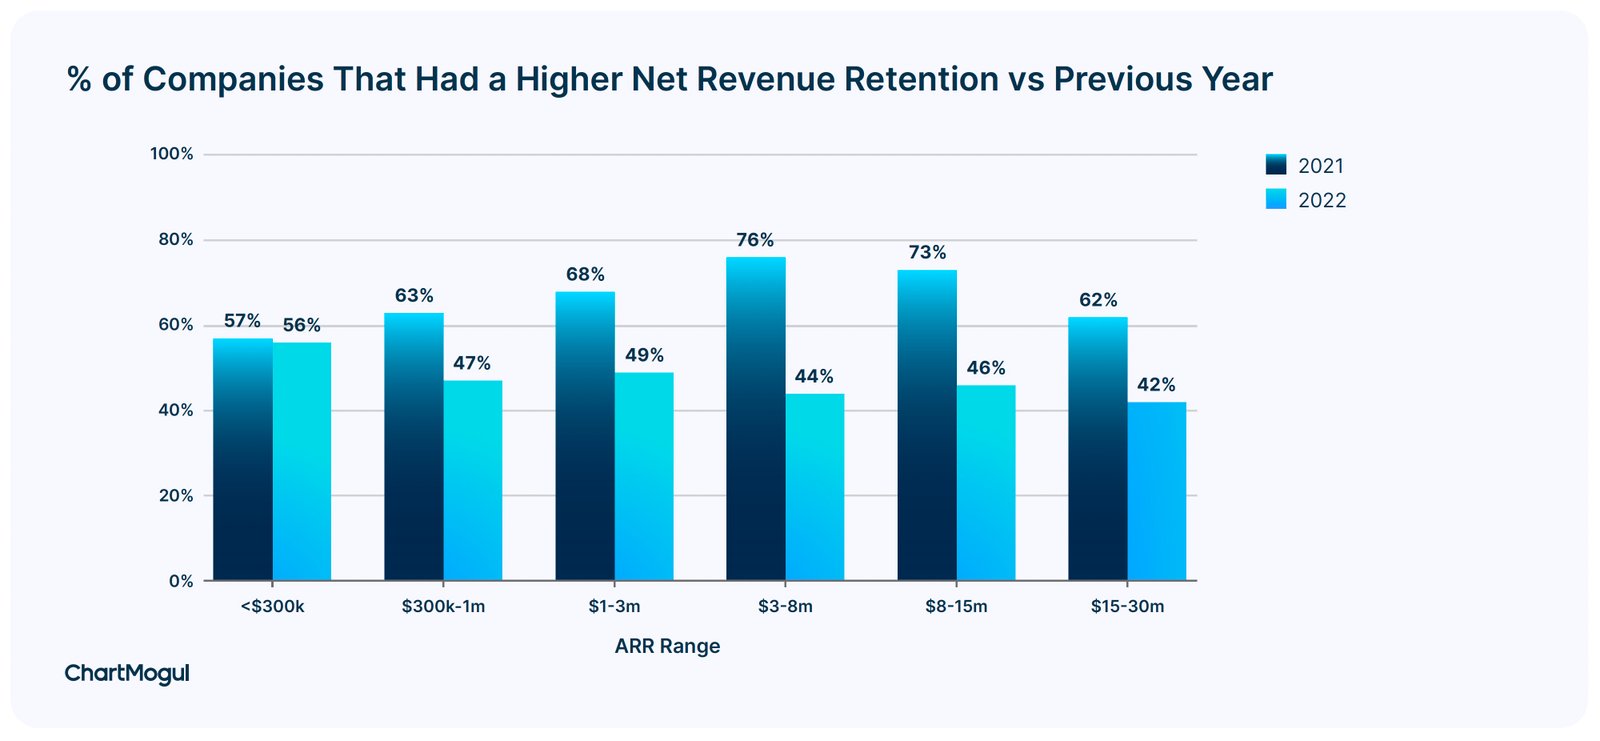 Percentage of companies that had a higher net revenue retention vs. previous year